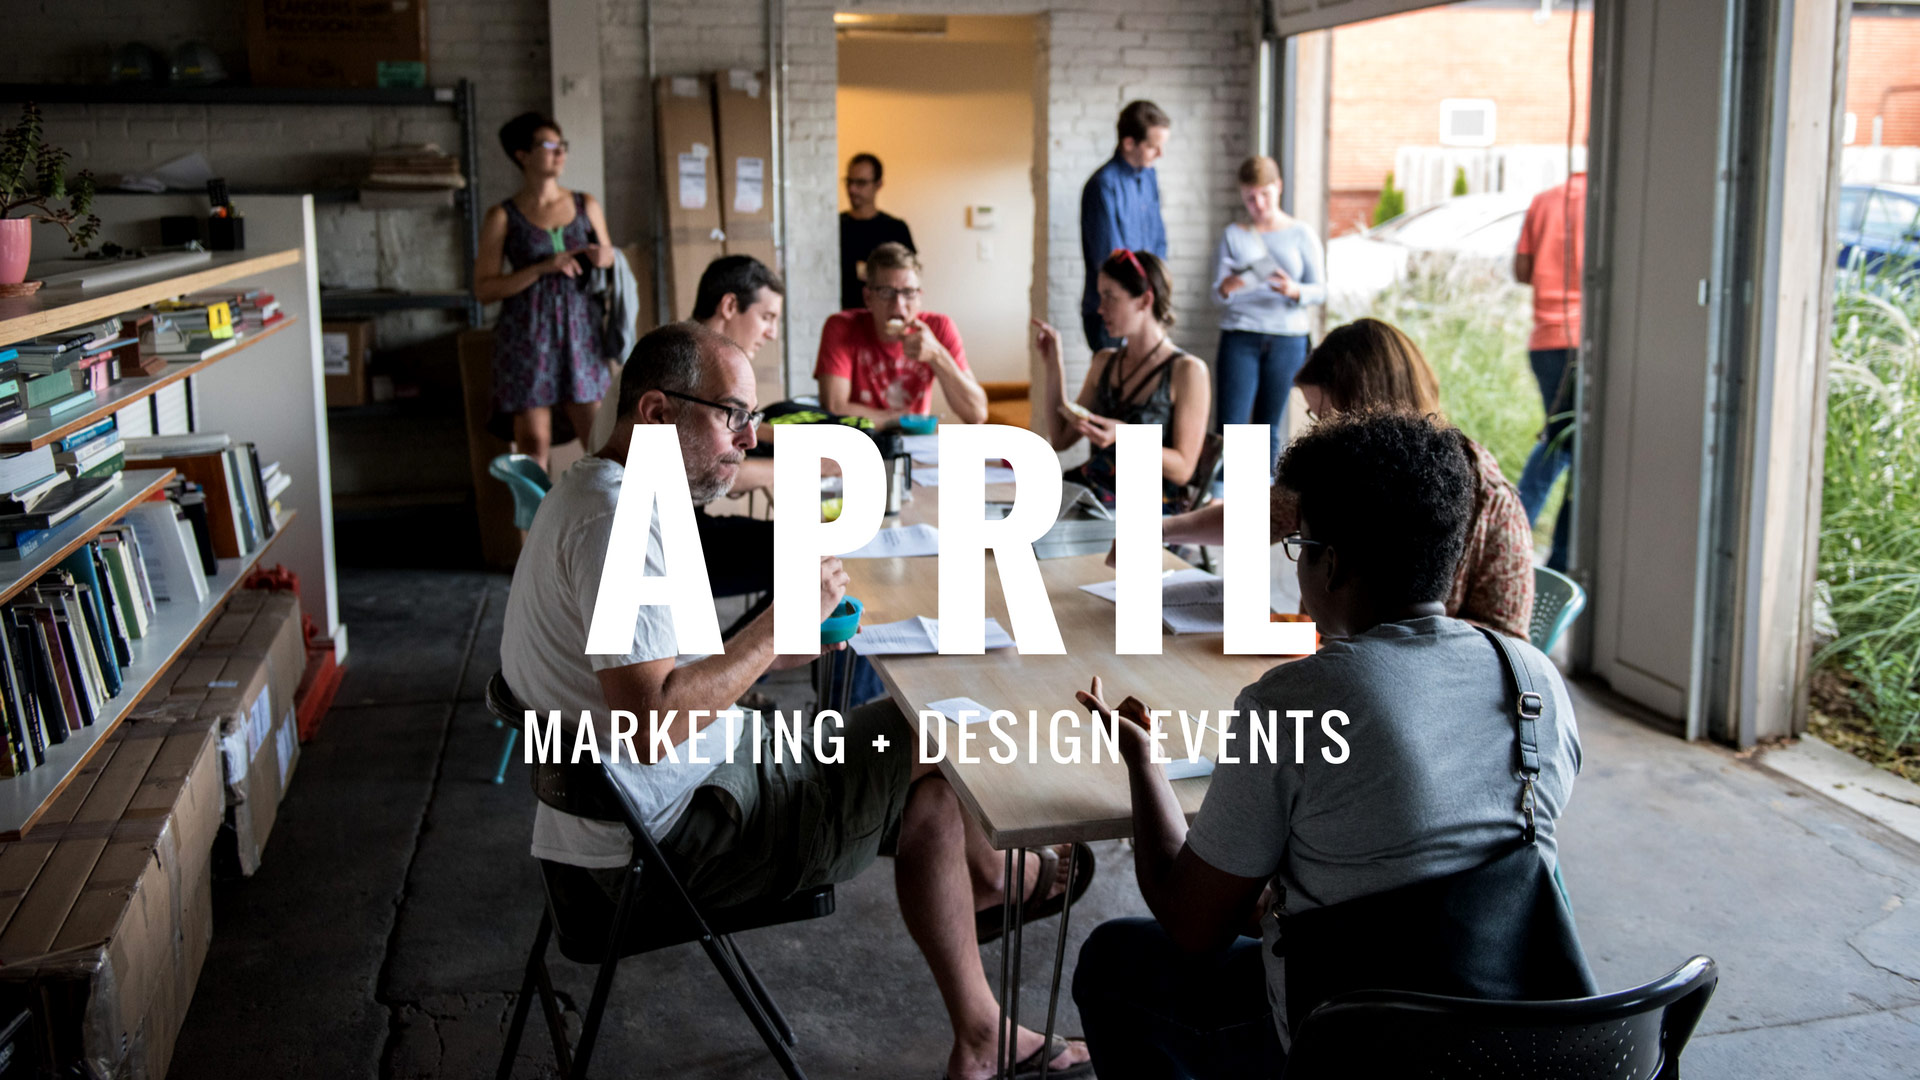 Aprile 2017 Design and Marketing Events in St. Louis